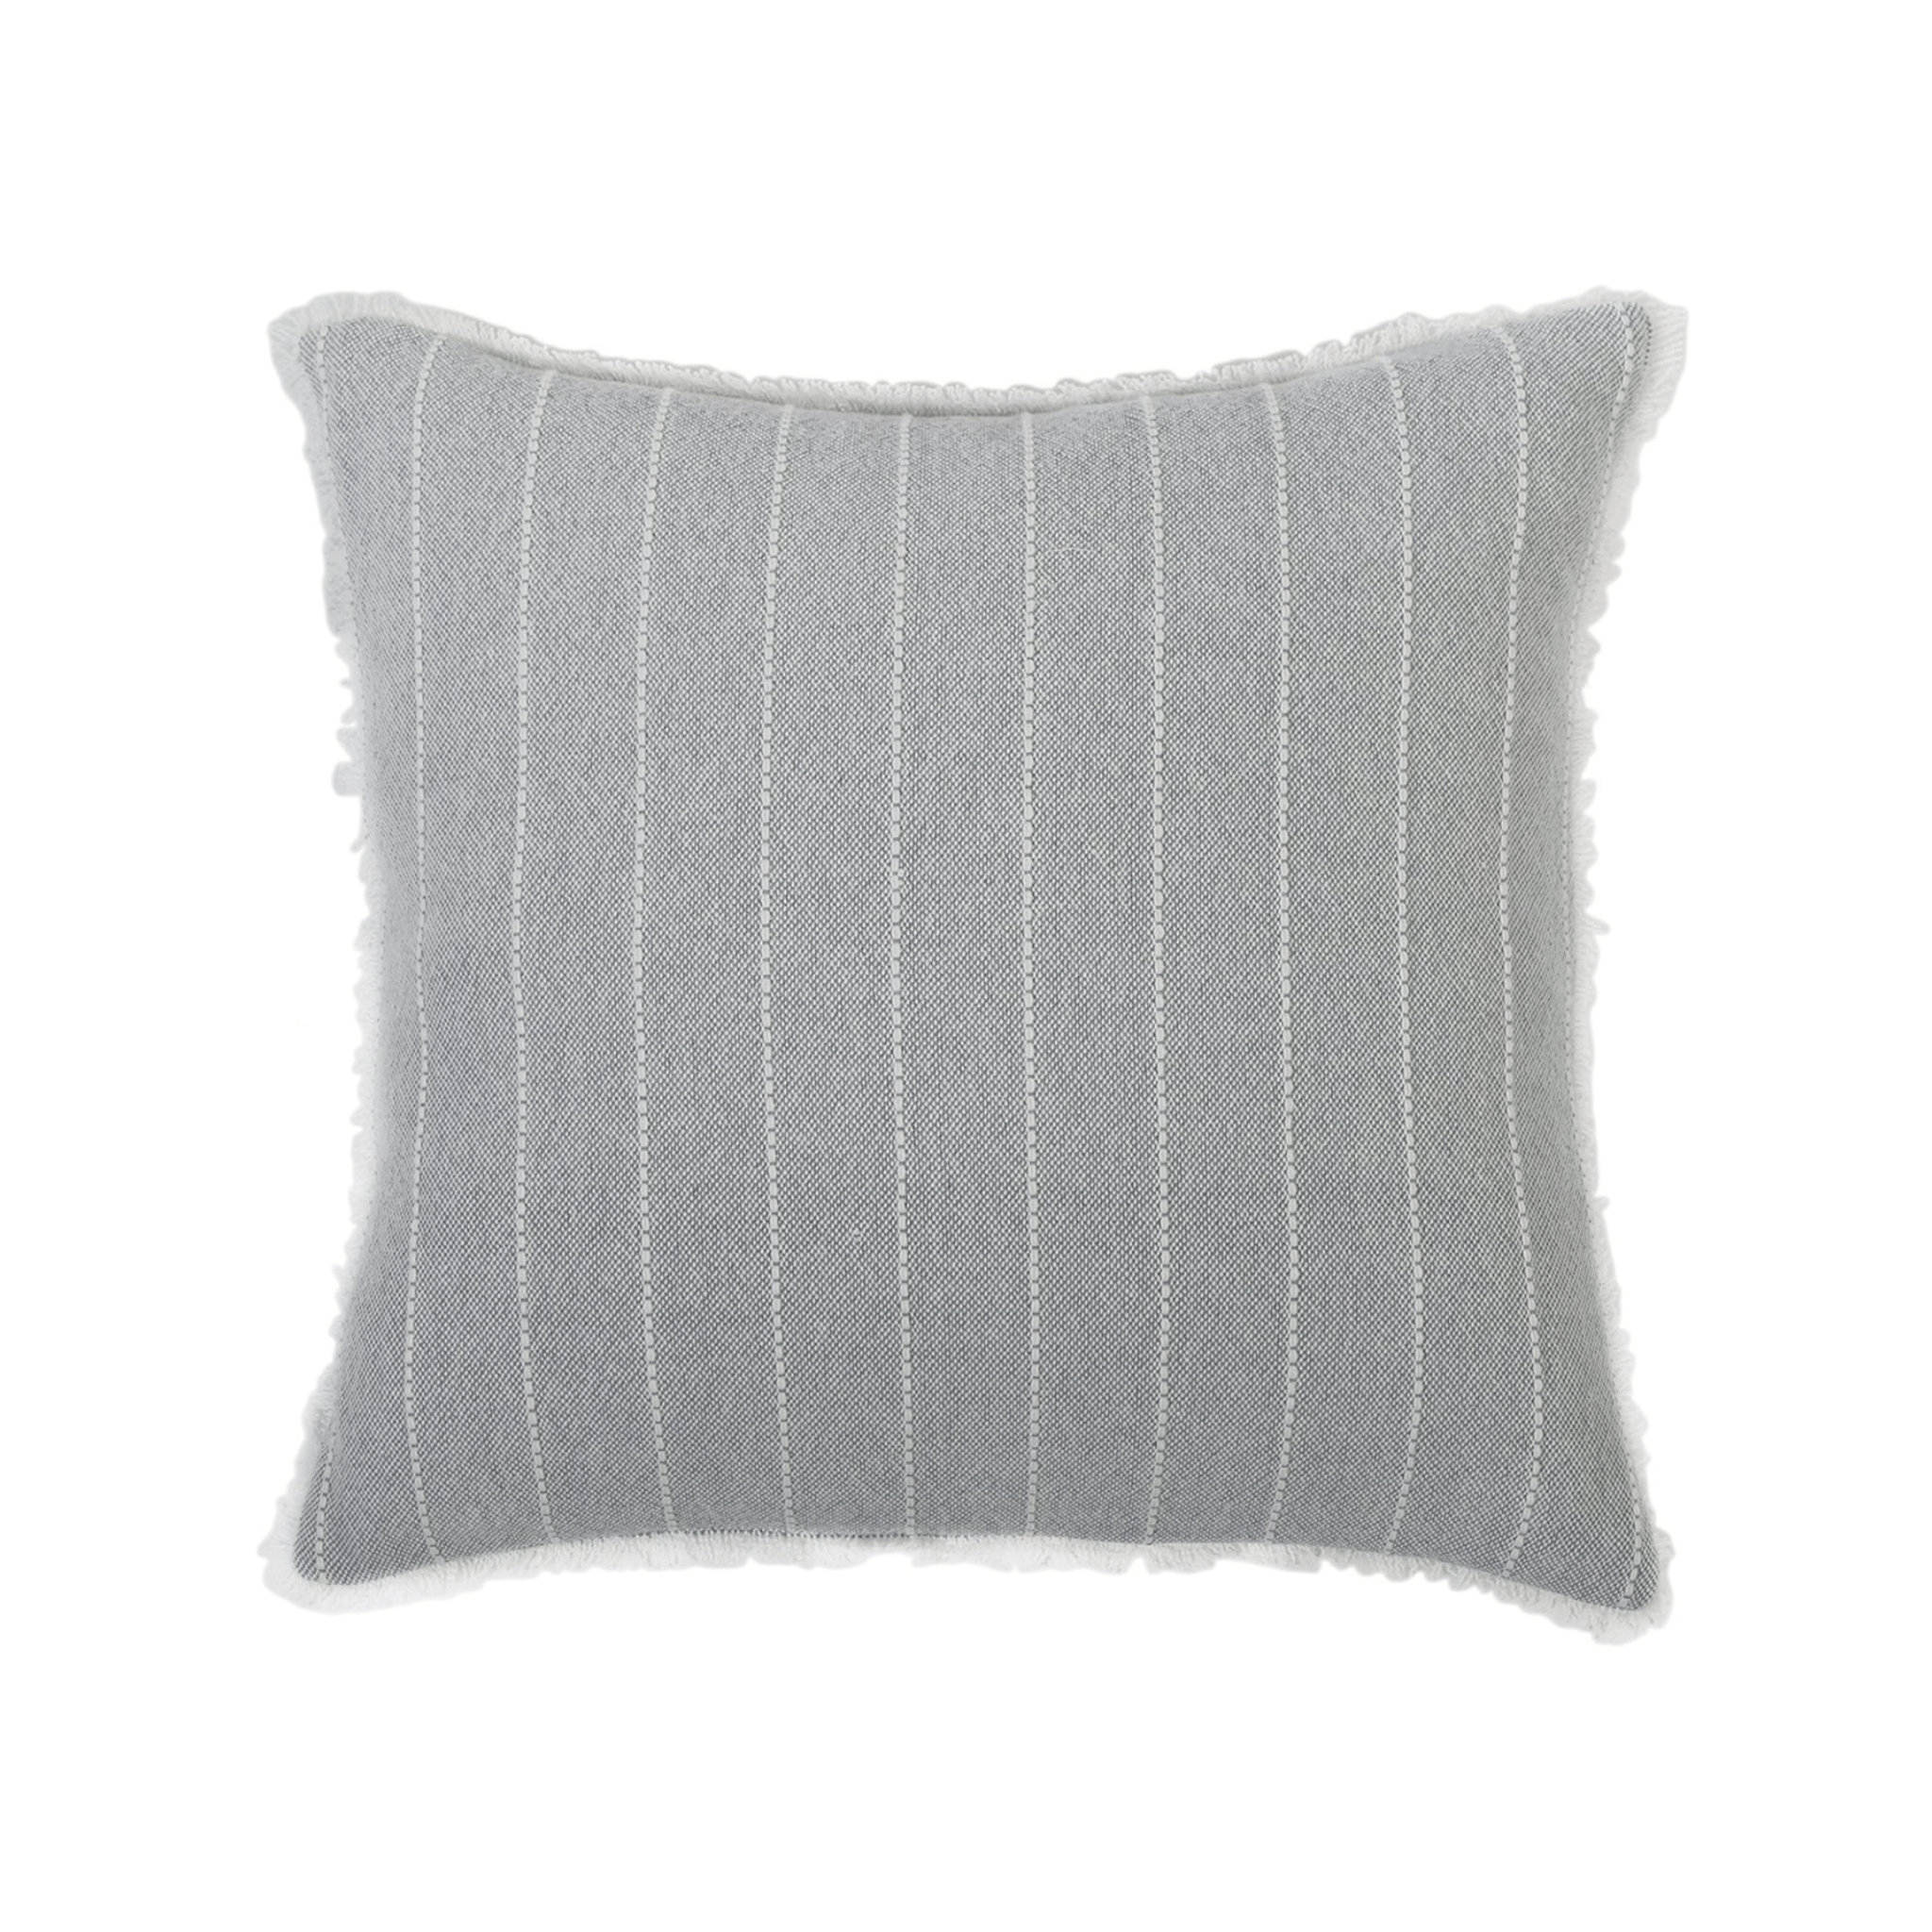 HENLEY HAND WOVEN PILLOW 20" X 20" WITH INSERT - 2 colors-Pom Pom at Home